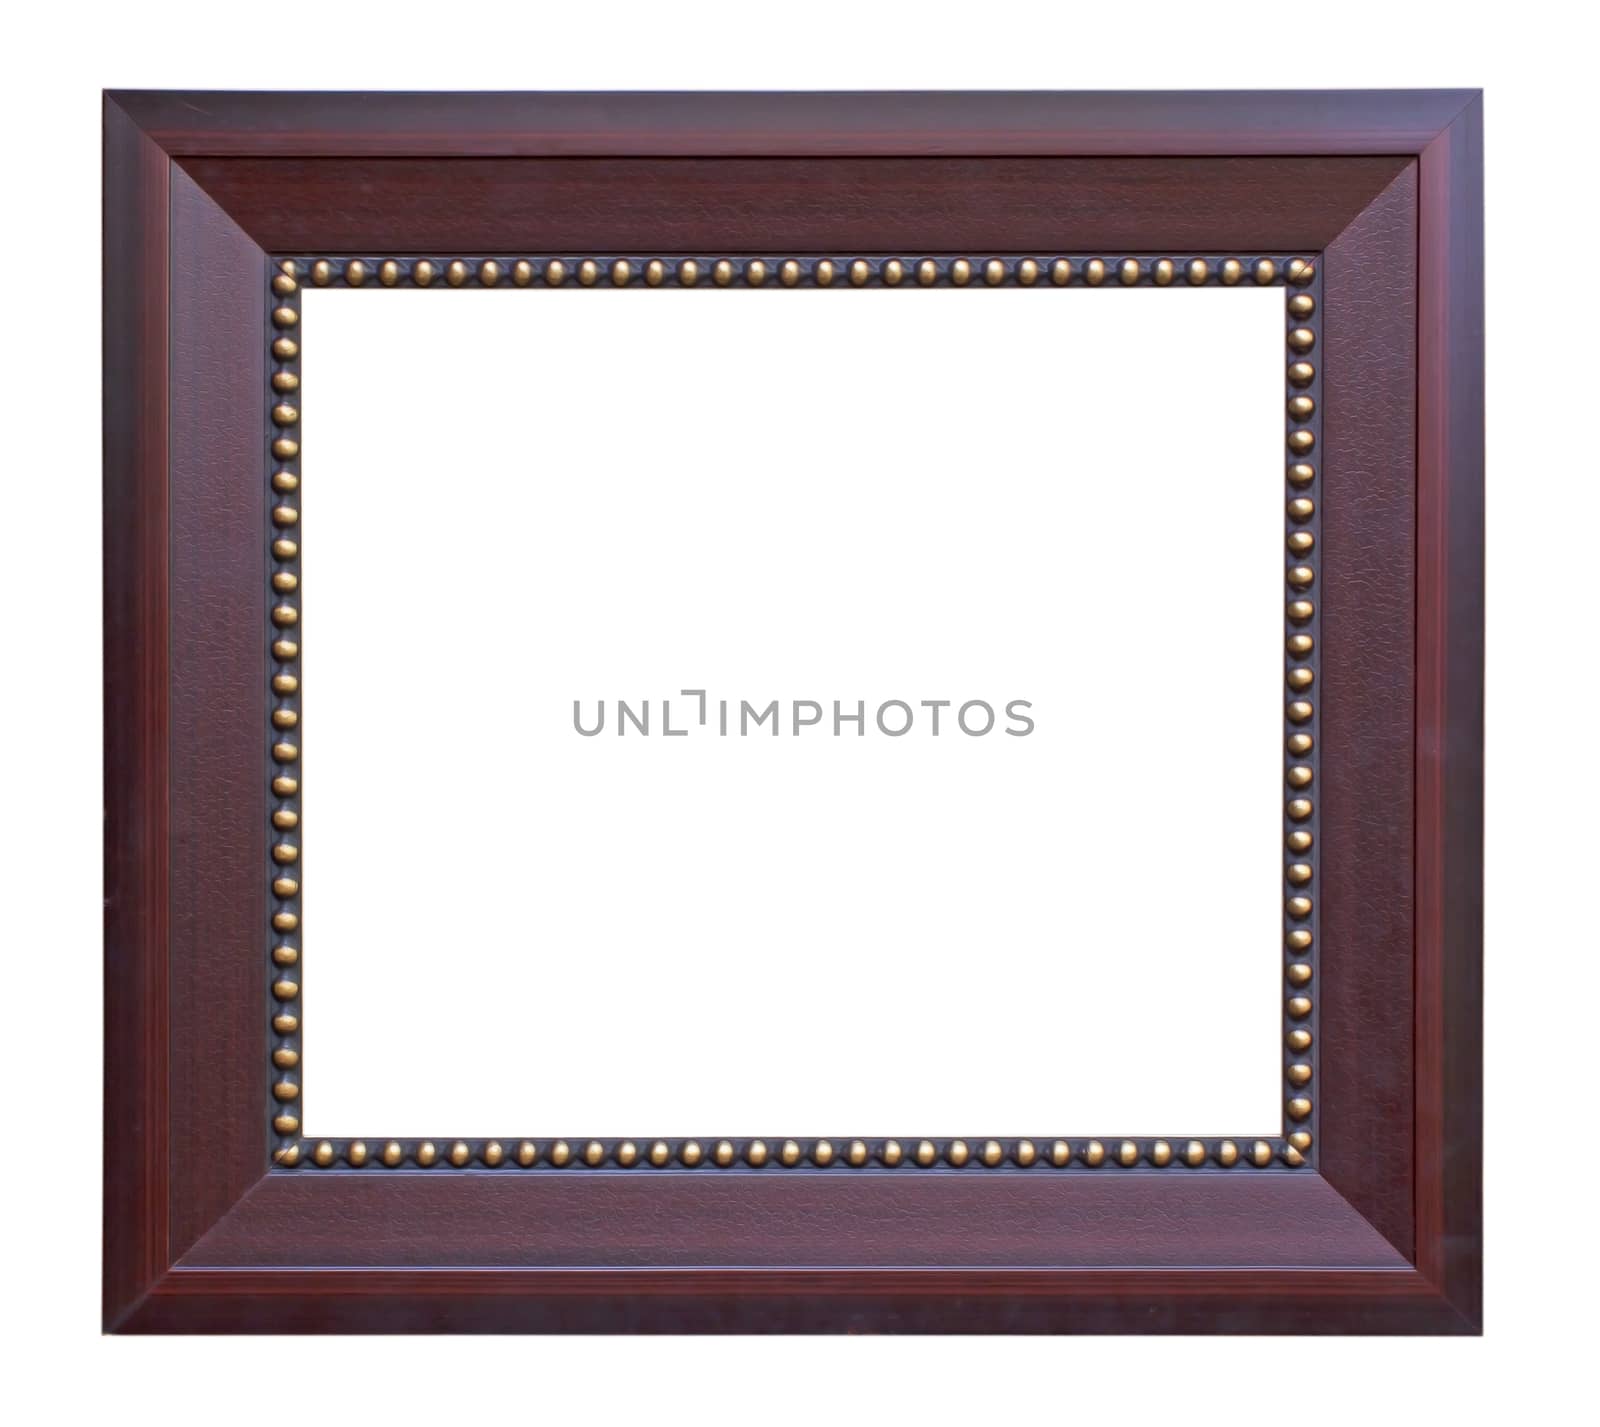 Ancient Wooden Frame Isolated On White Background.